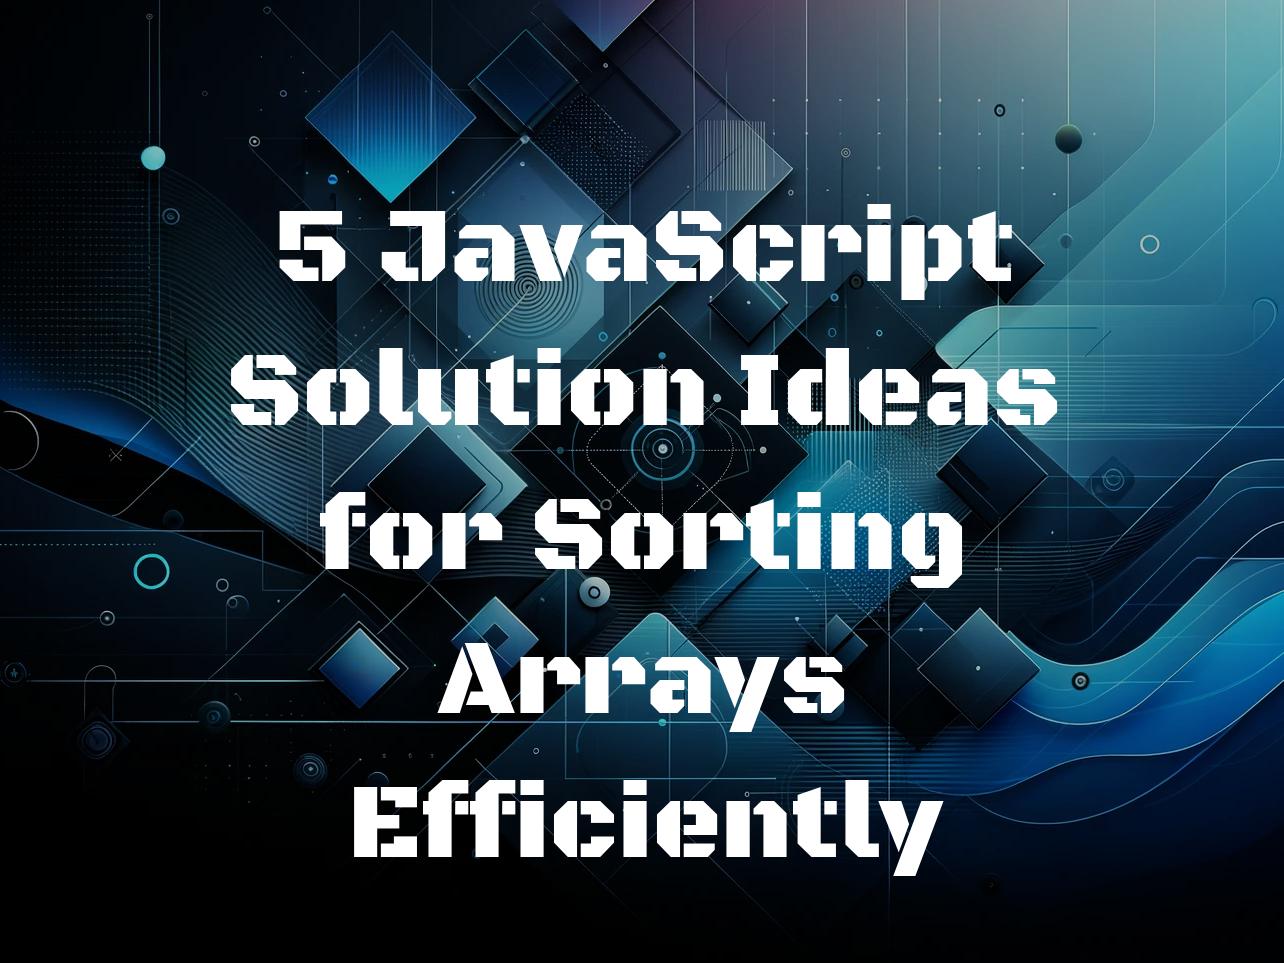 5 JavaScript Solution Ideas for Sorting Arrays Efficiently